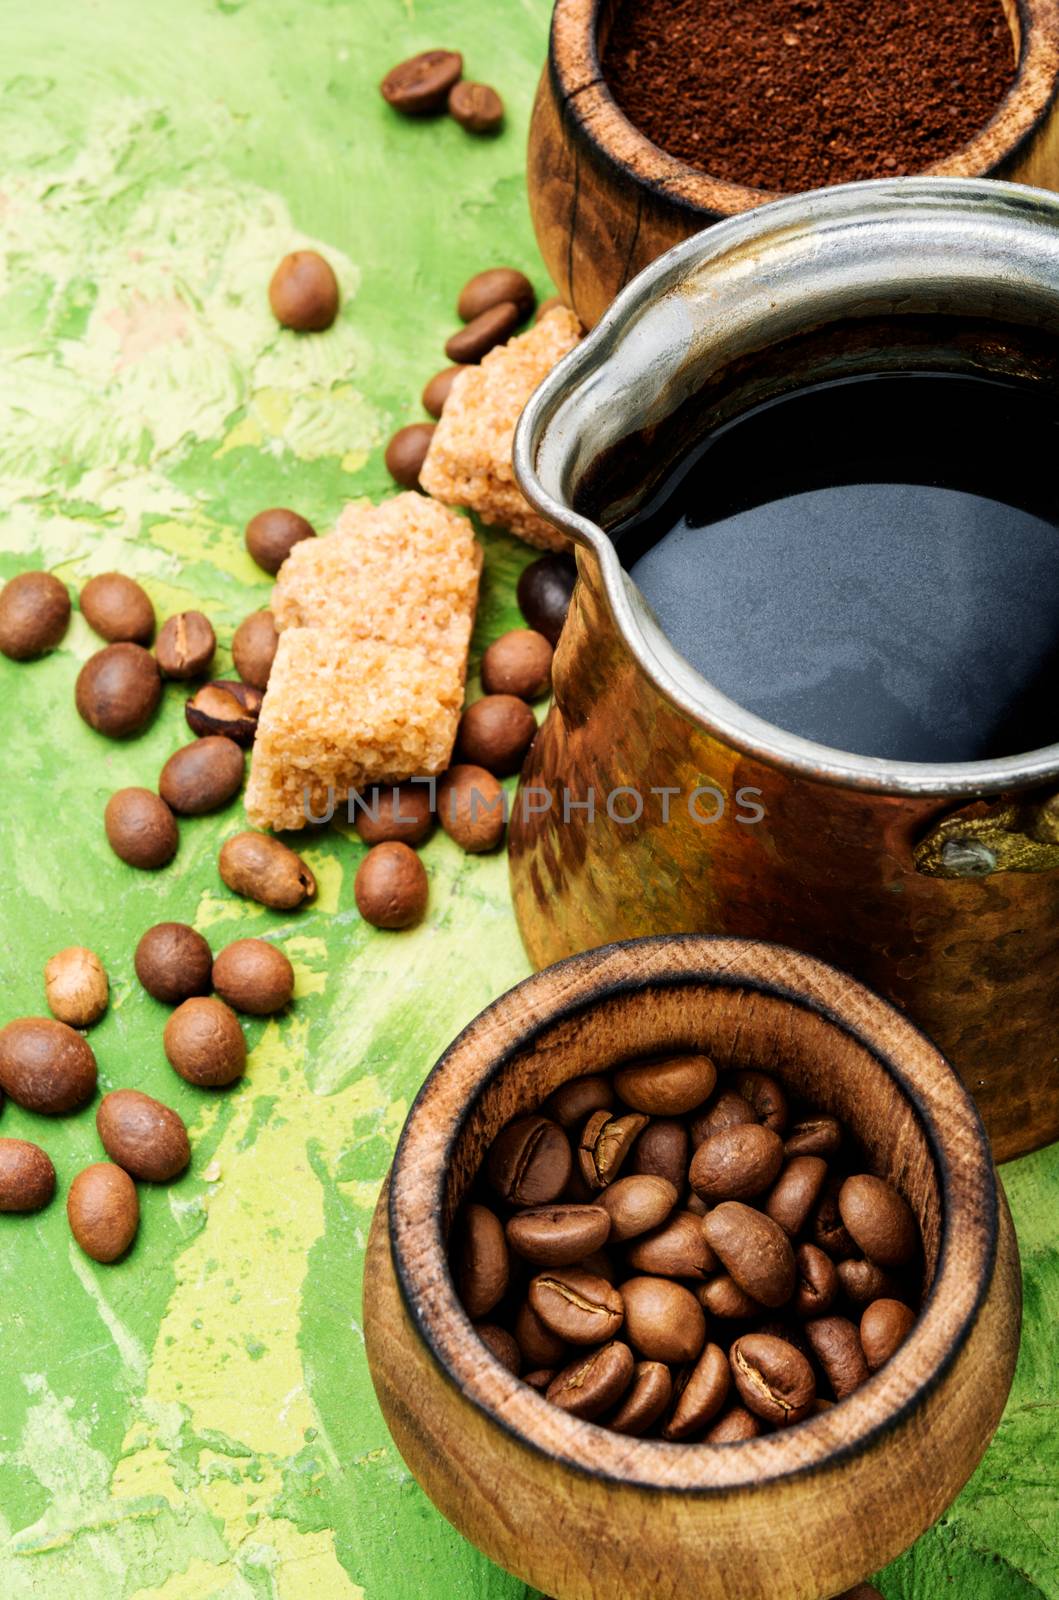 Roasted coffee beans and ground coffee.Coffee on green background